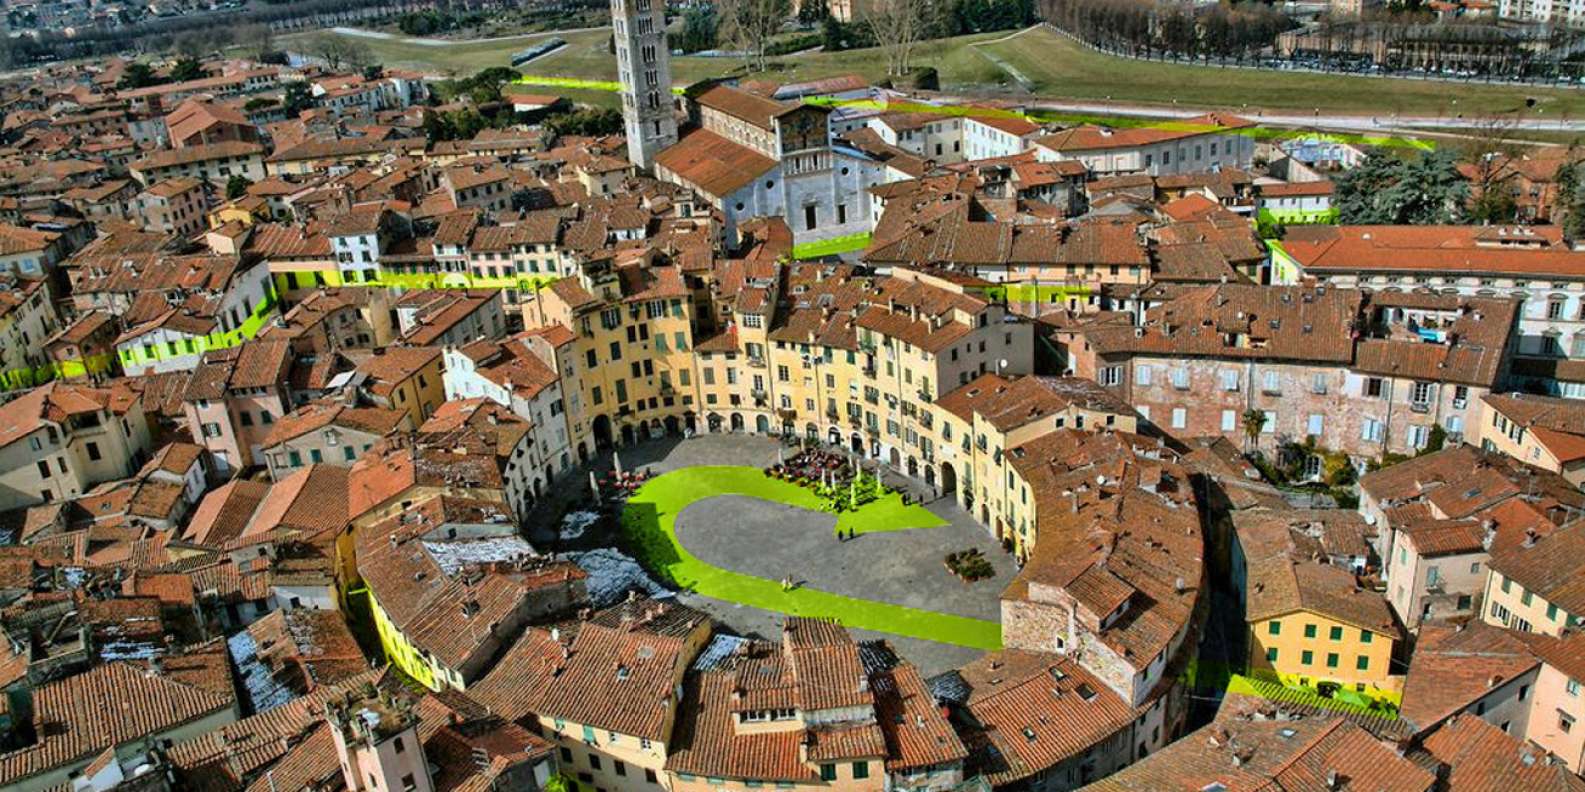 things to do in Lucca